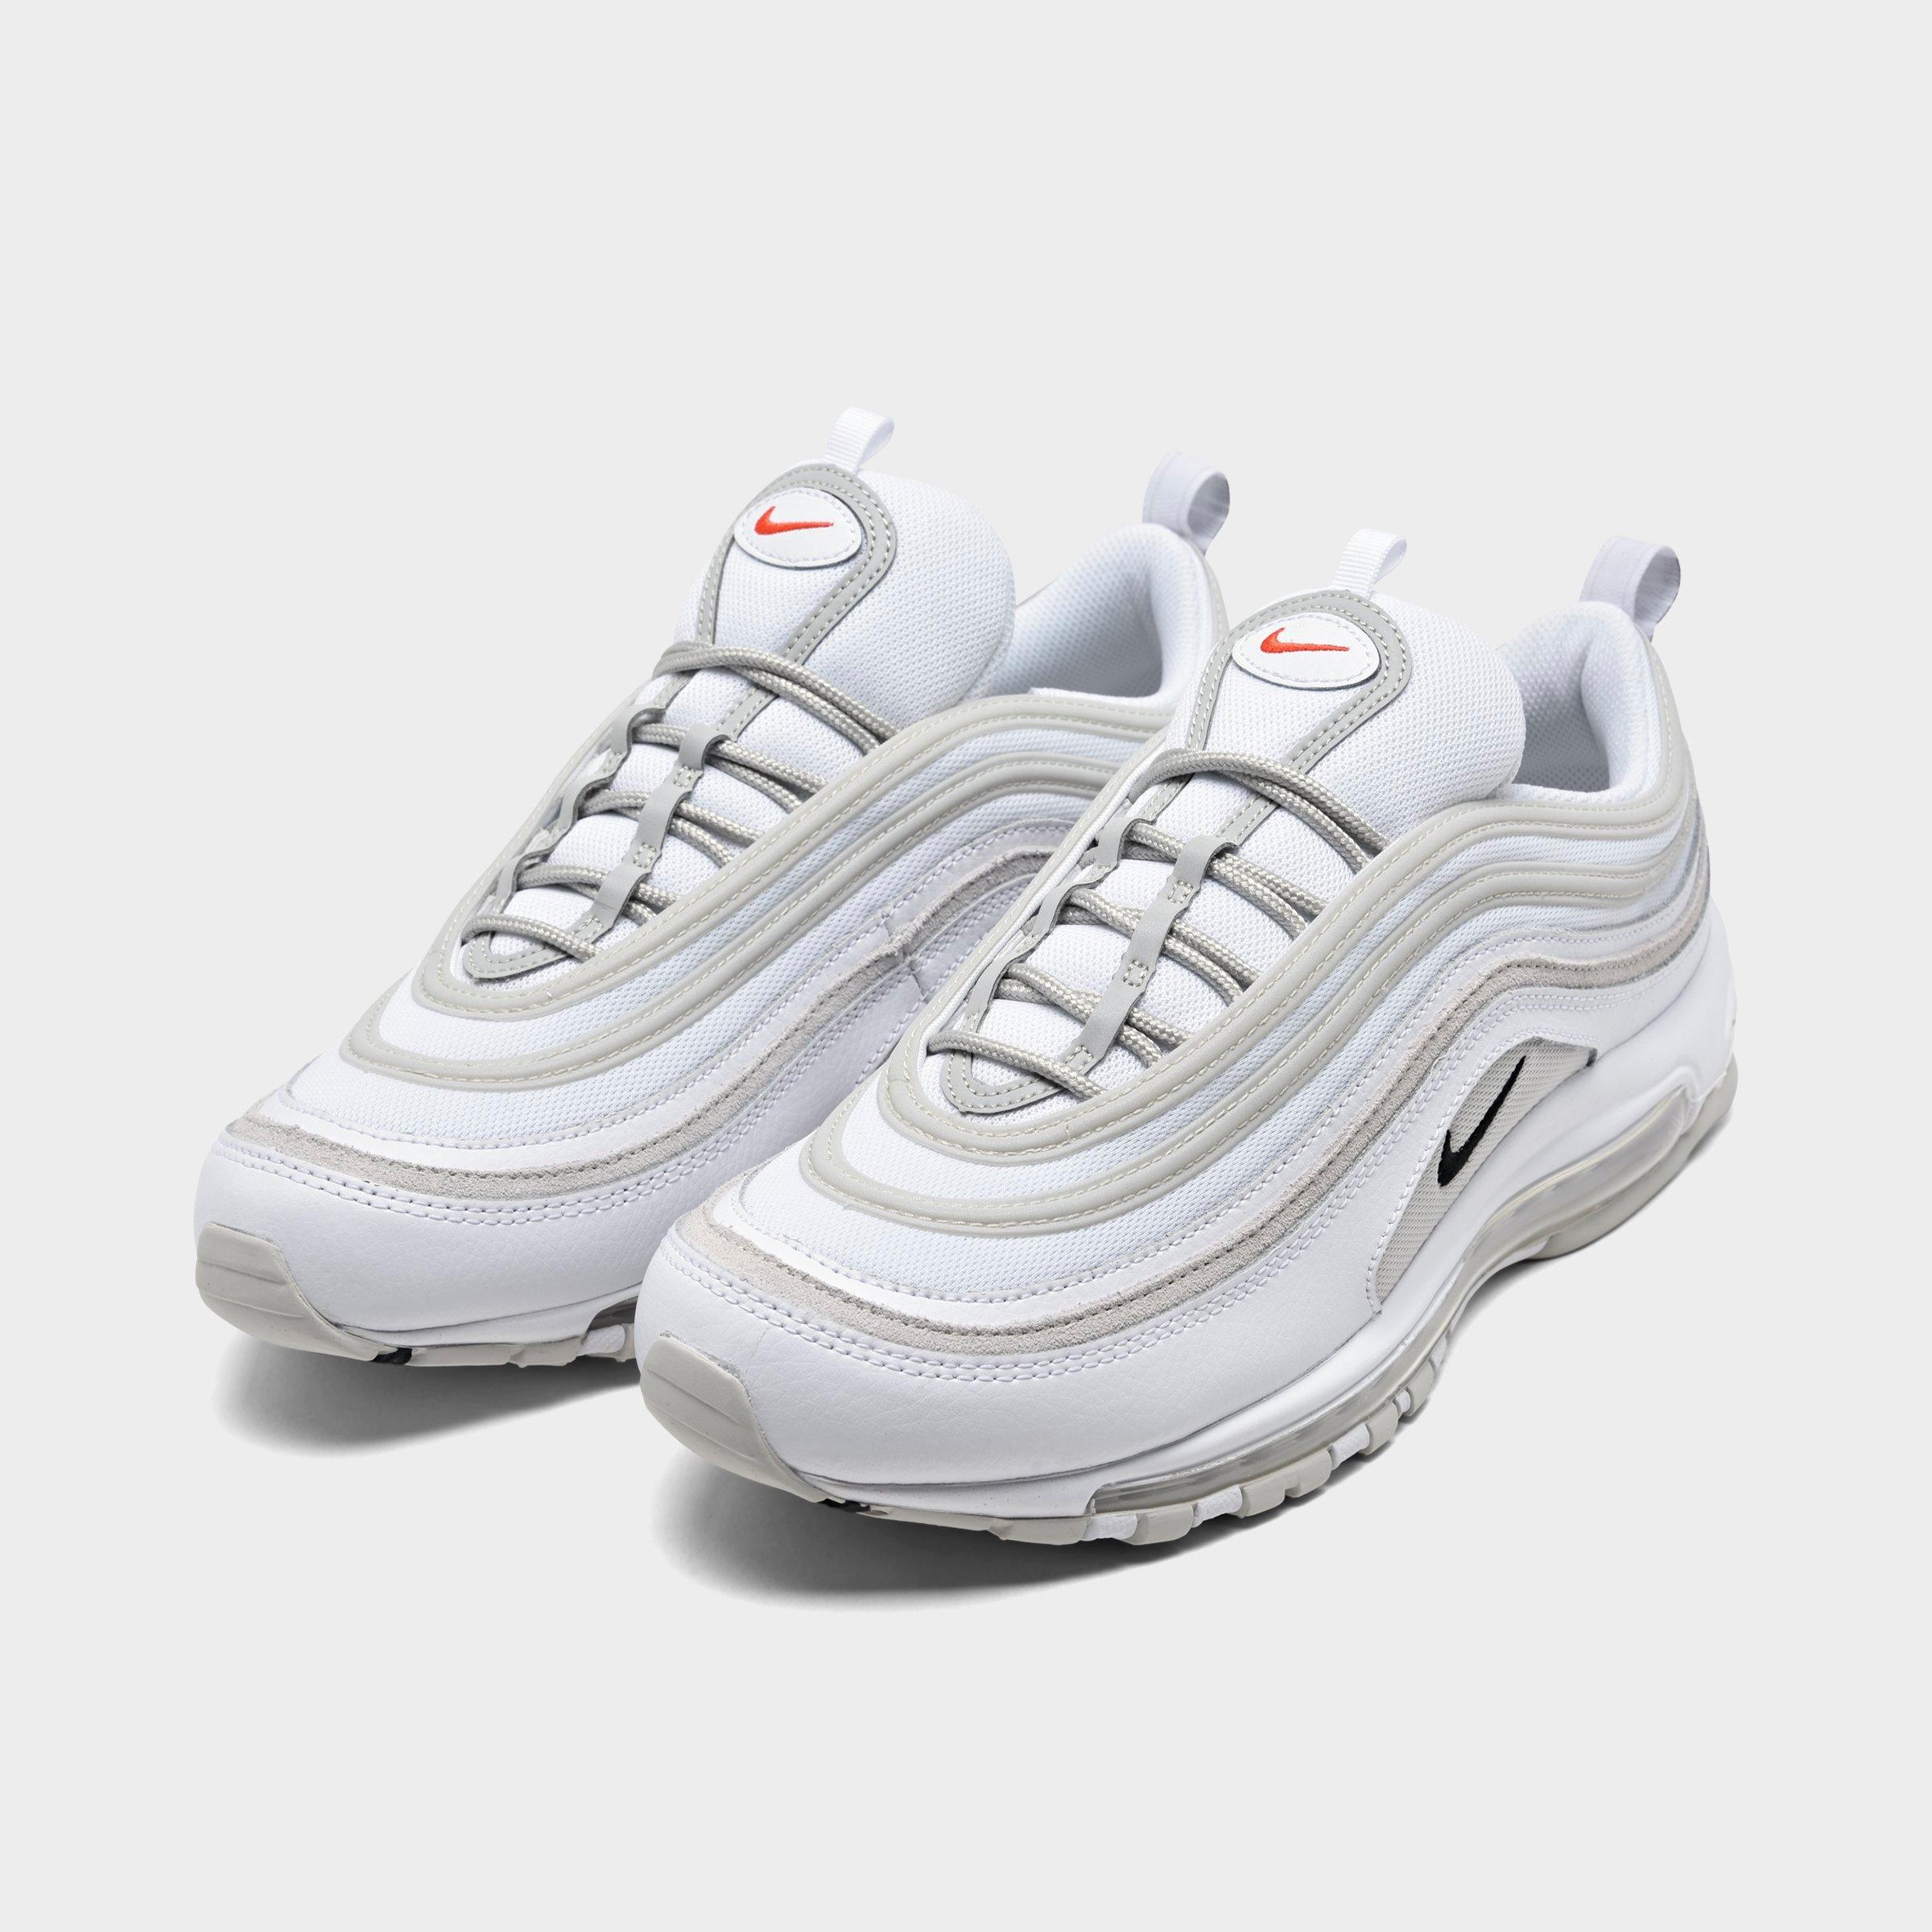 men's nike air max 97 casual shoes white